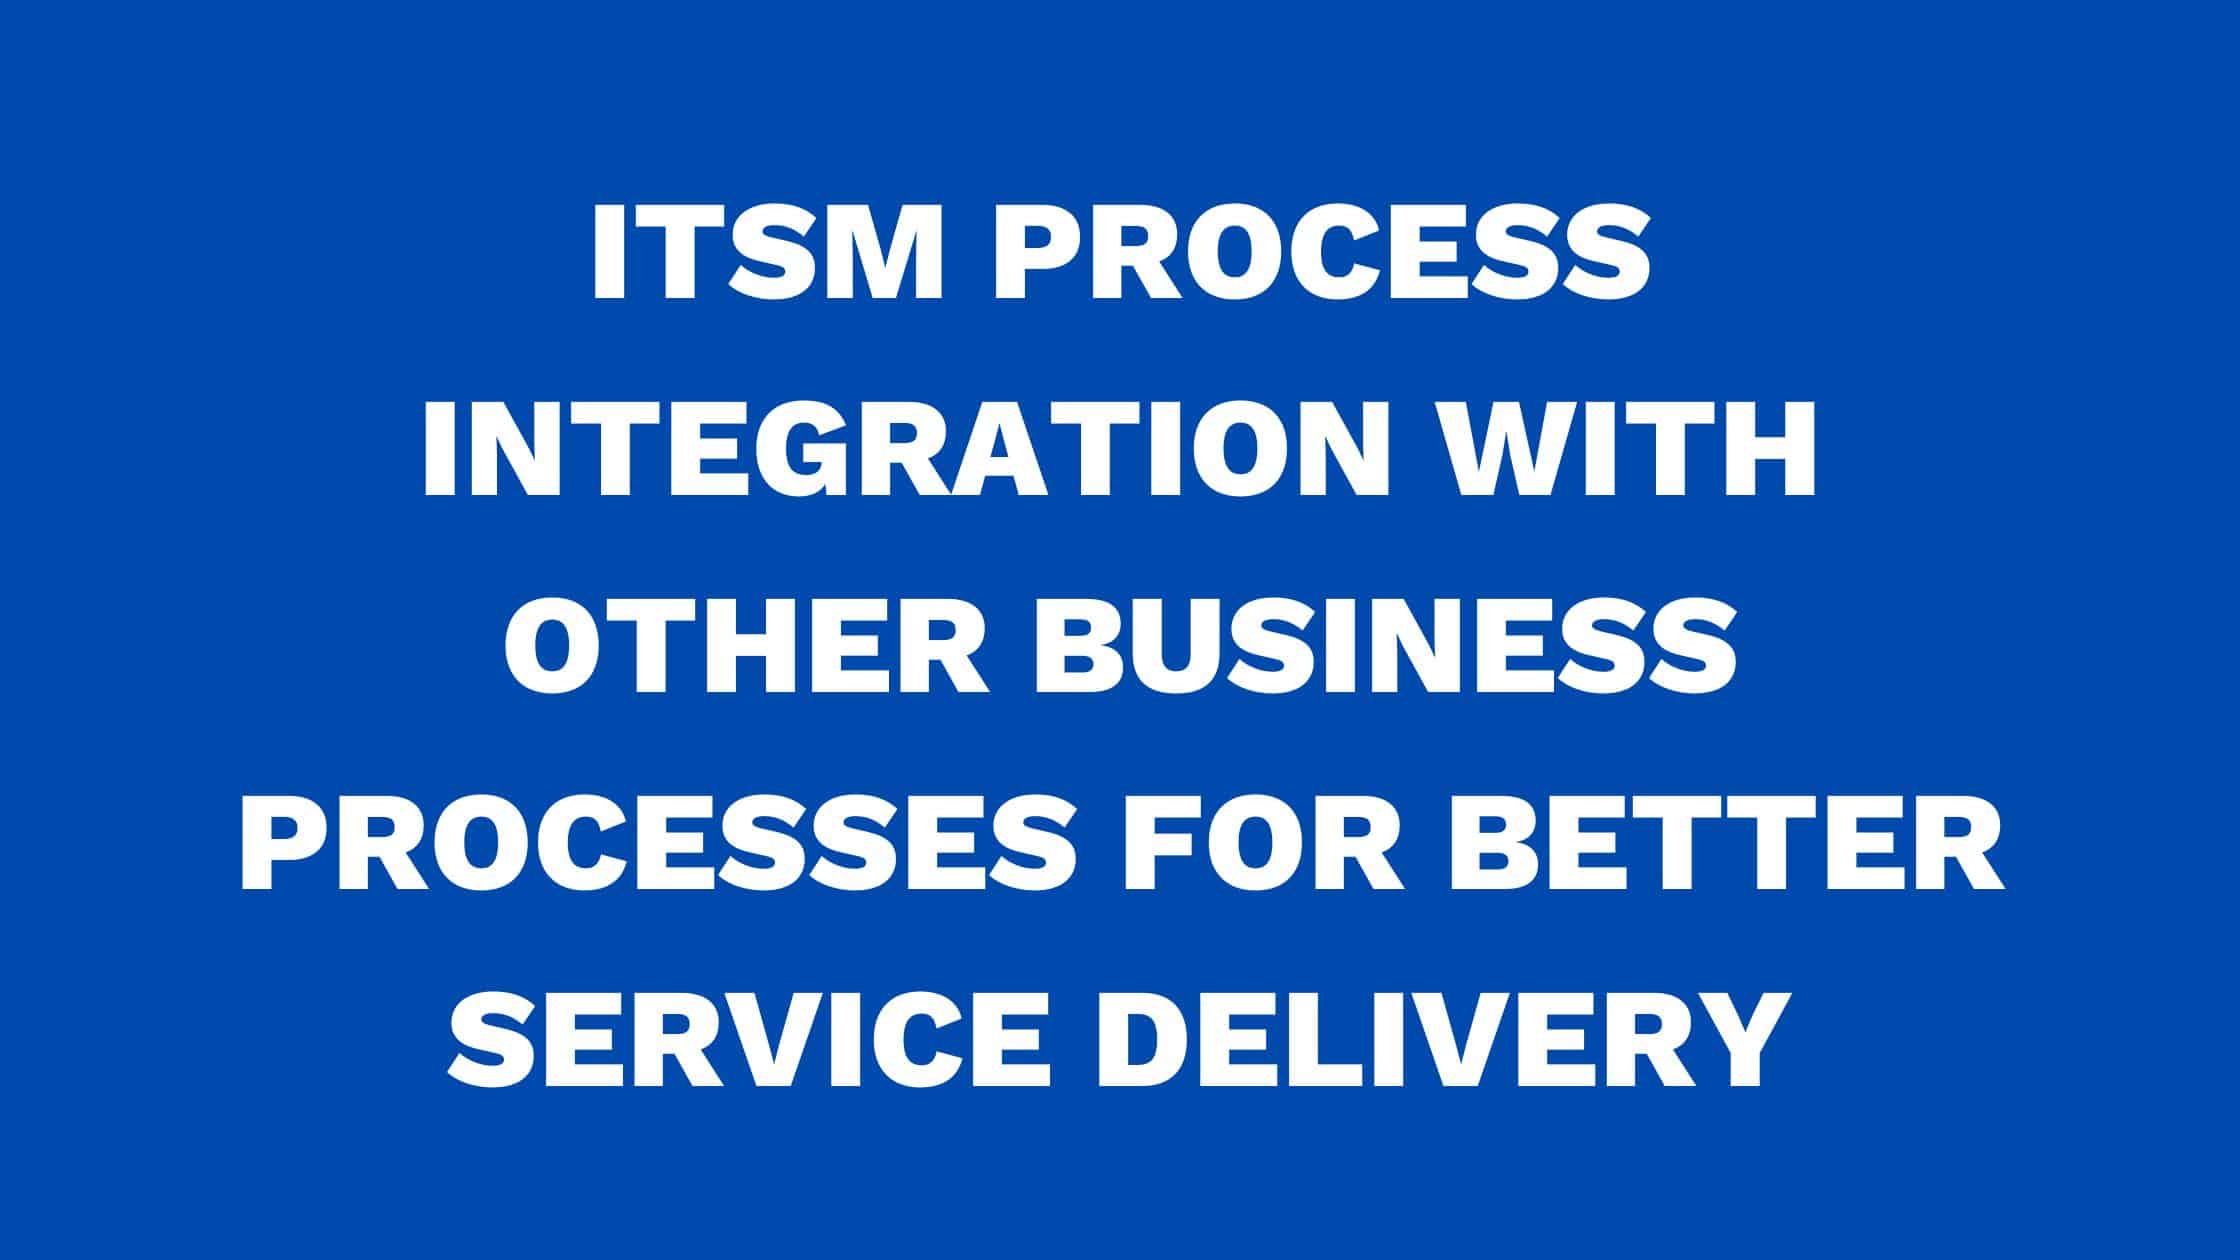 ITSM tools integration with other business processes for better service delivery